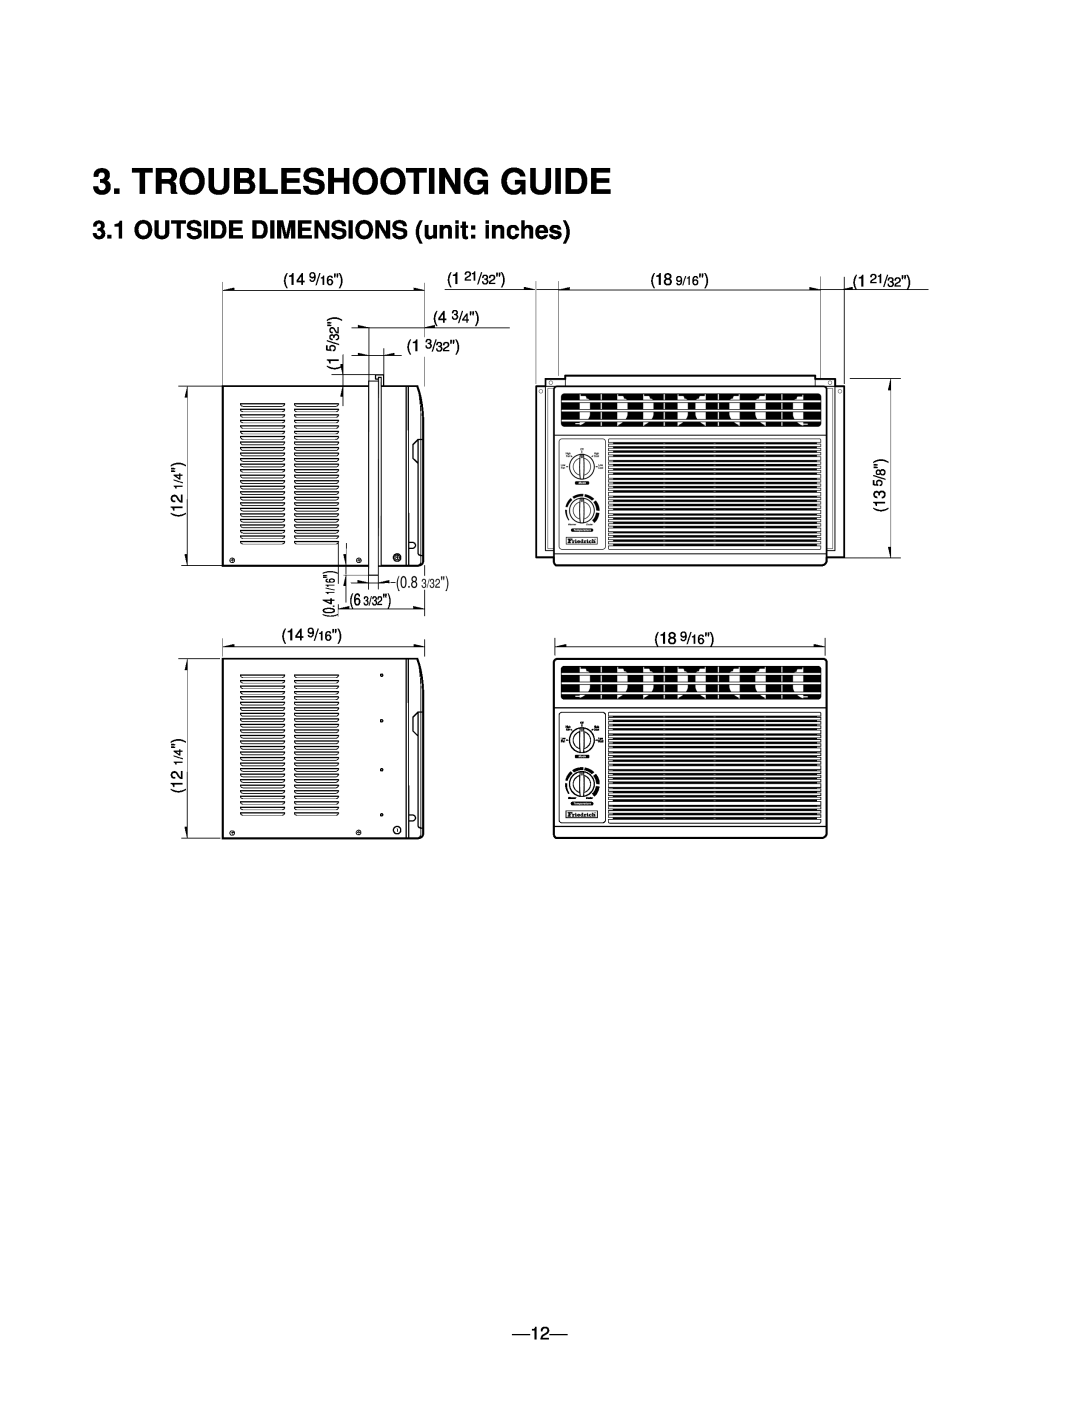 Friedrich ZQ05C10 manual Troubleshooting Guide, OUTSIDE DIMENSIONS unit inches, 0.8 3/32 6 3/32 